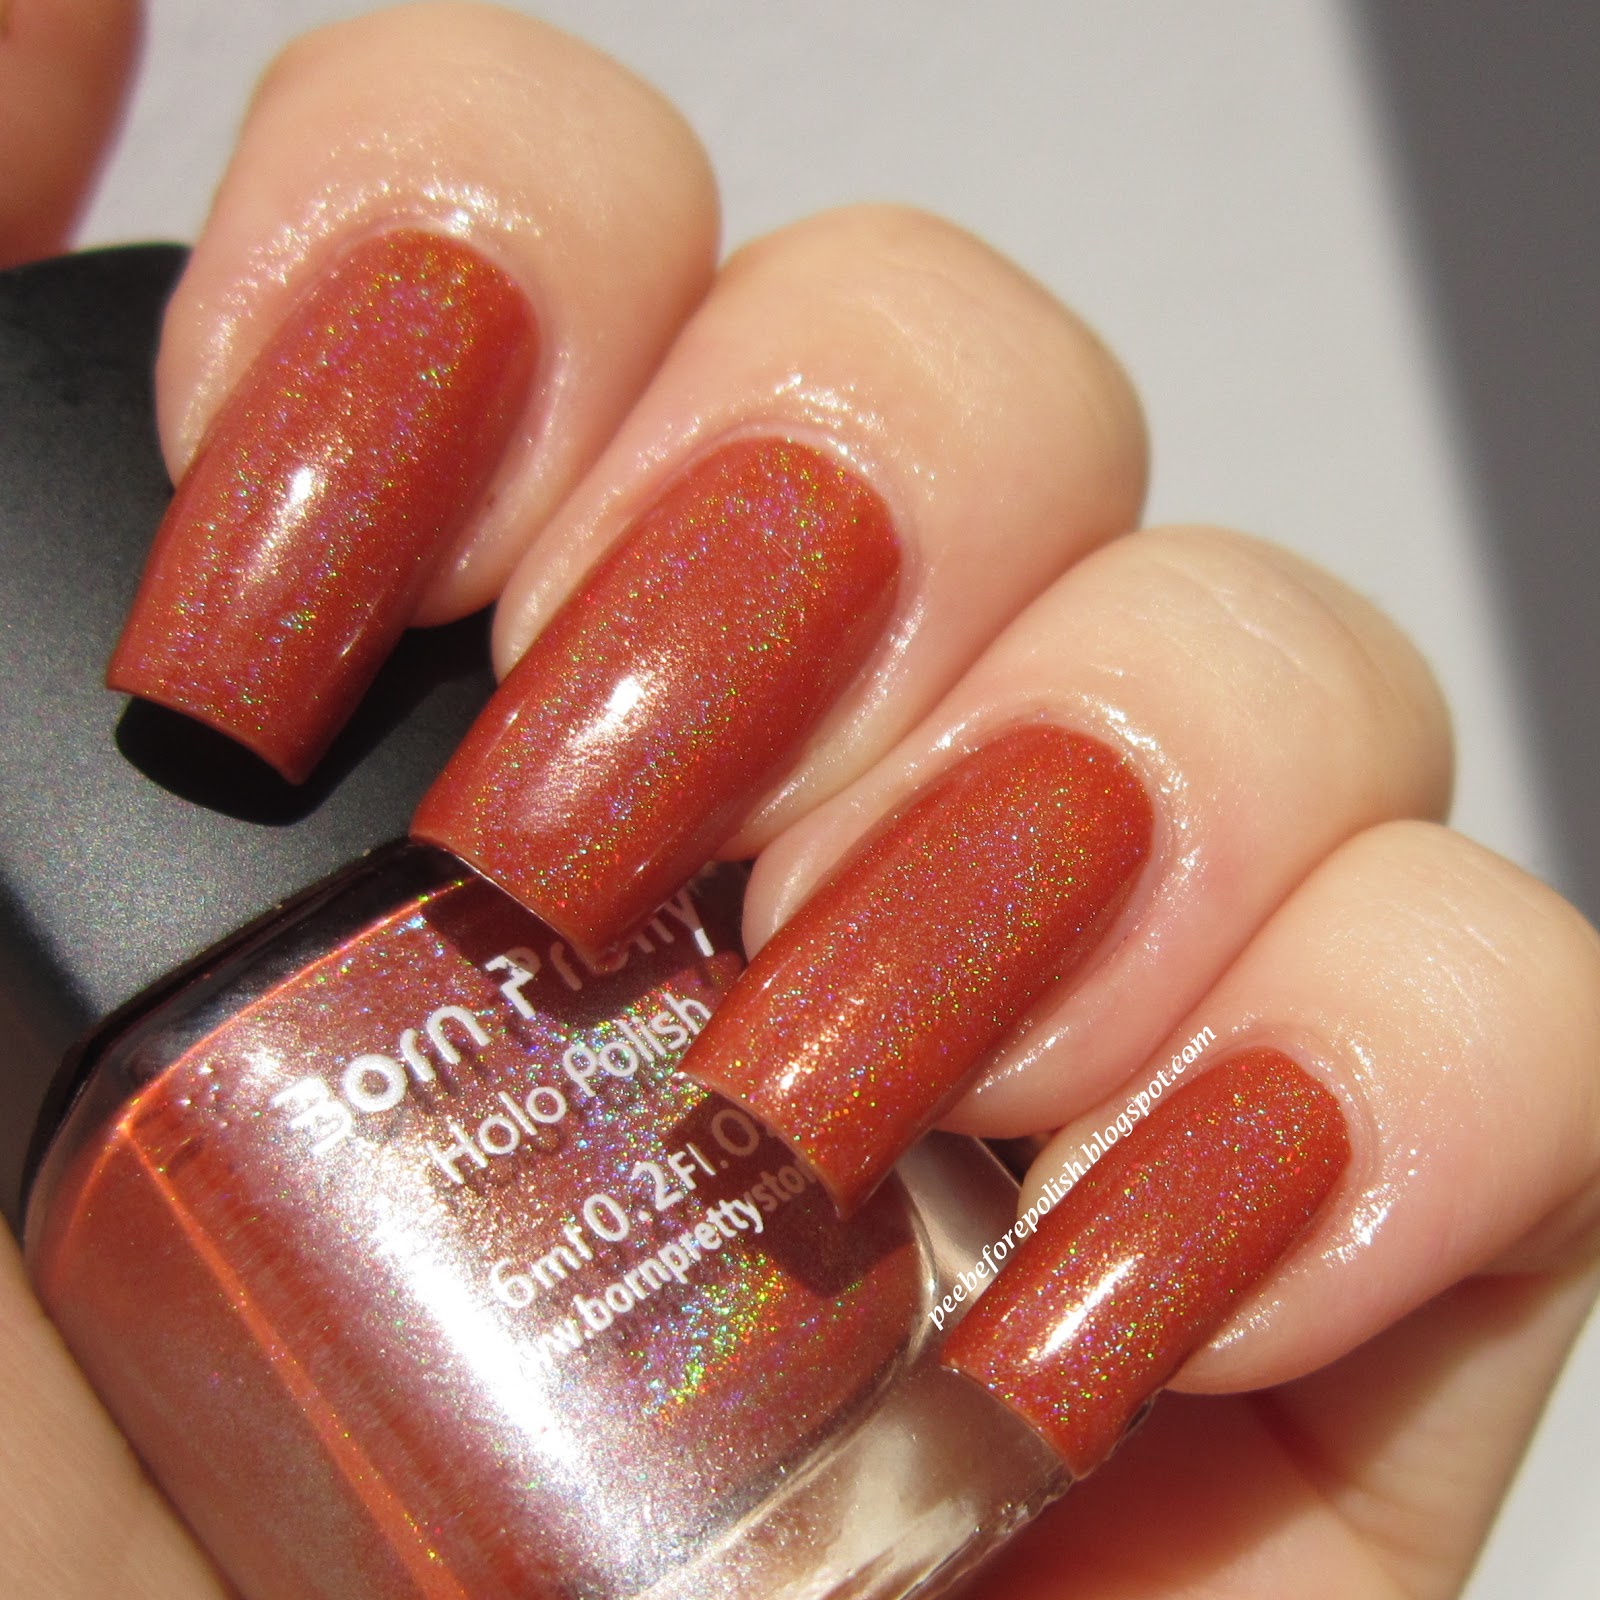 Pee Before Polish: The Other Side of Holos: Born Pretty Store Holo ...